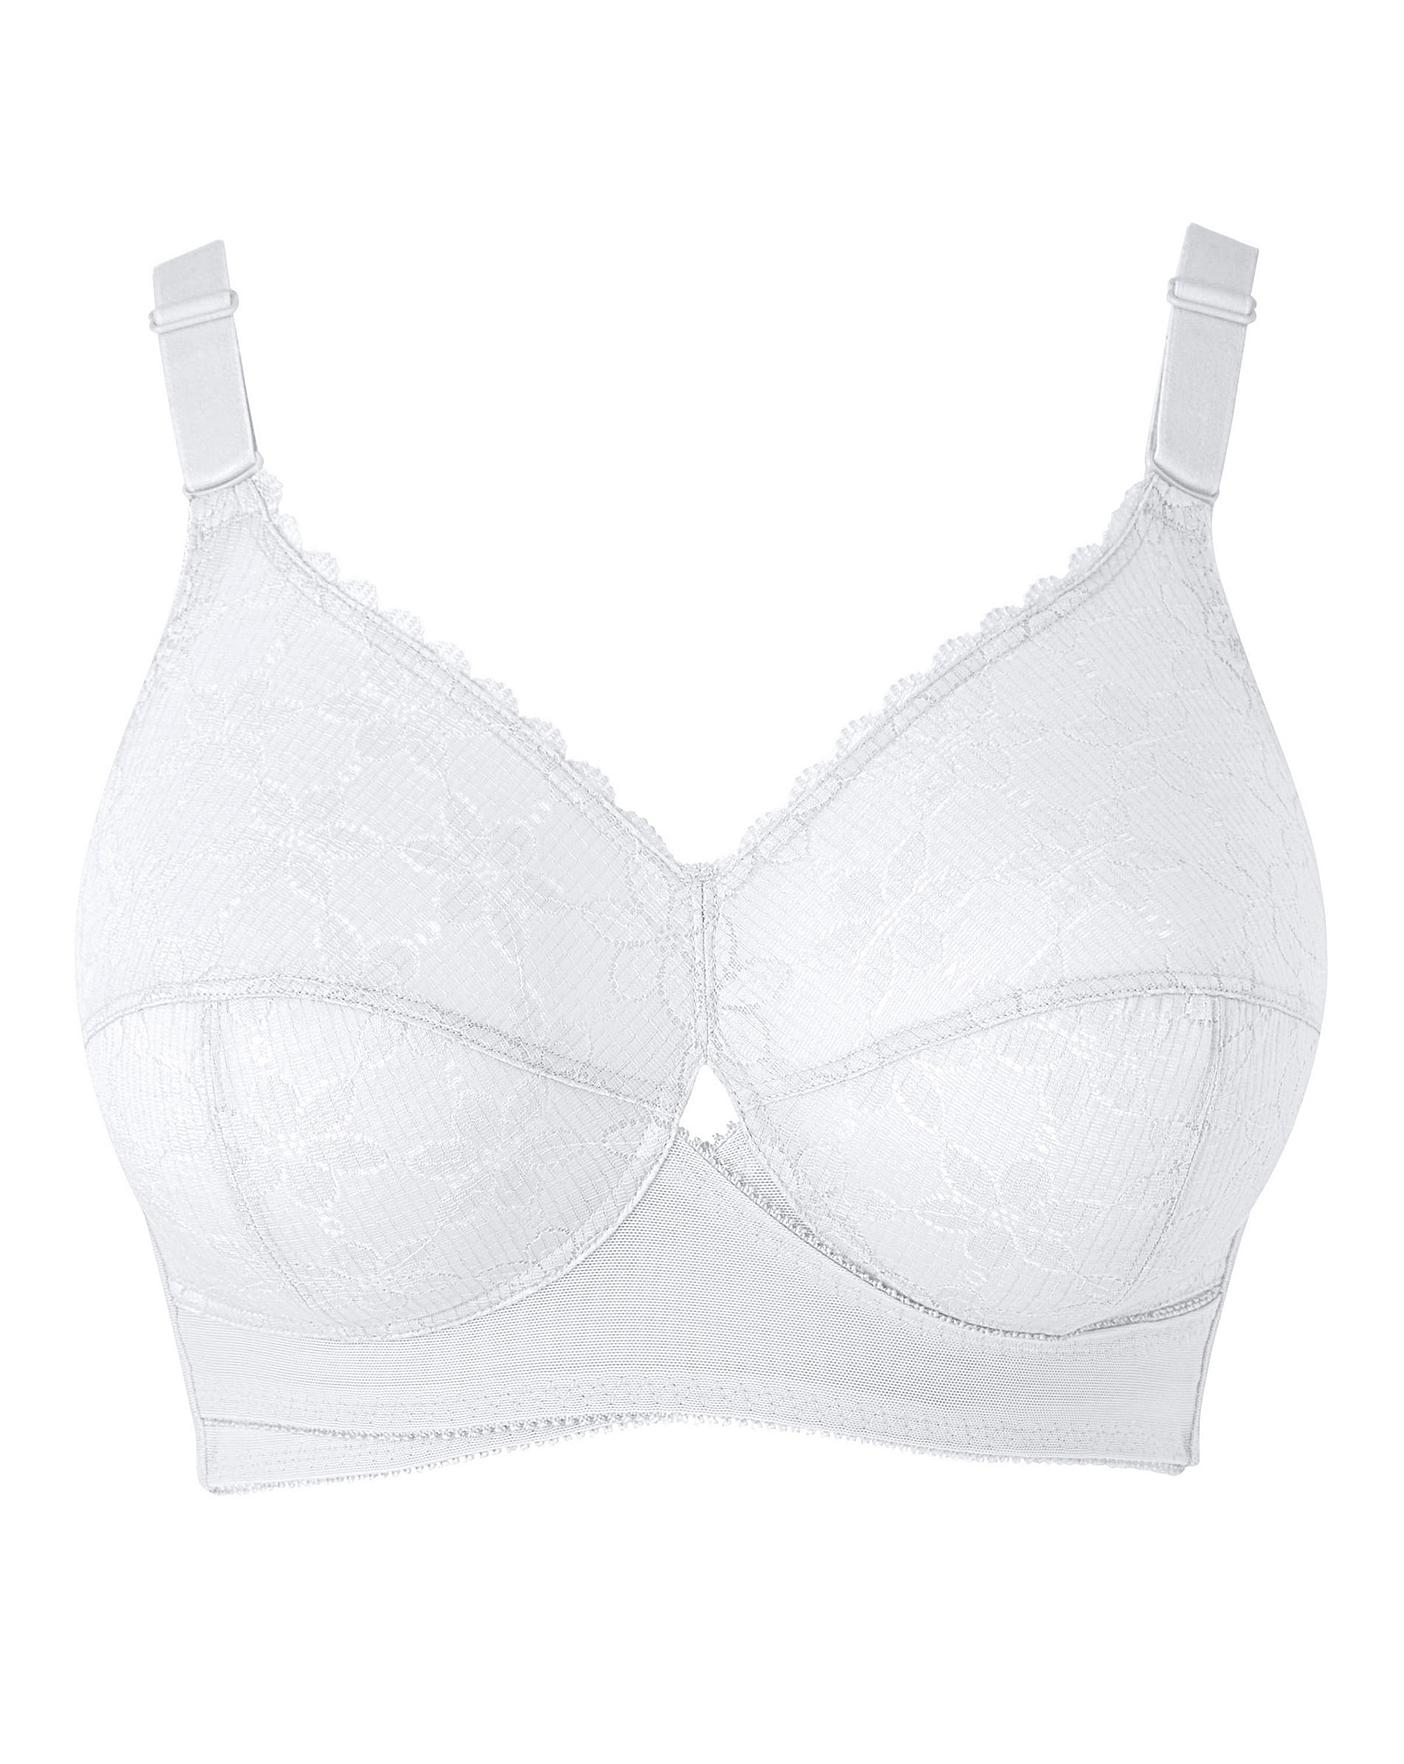 Berlei Classic Lace - Cooks Lingerie & Manchester